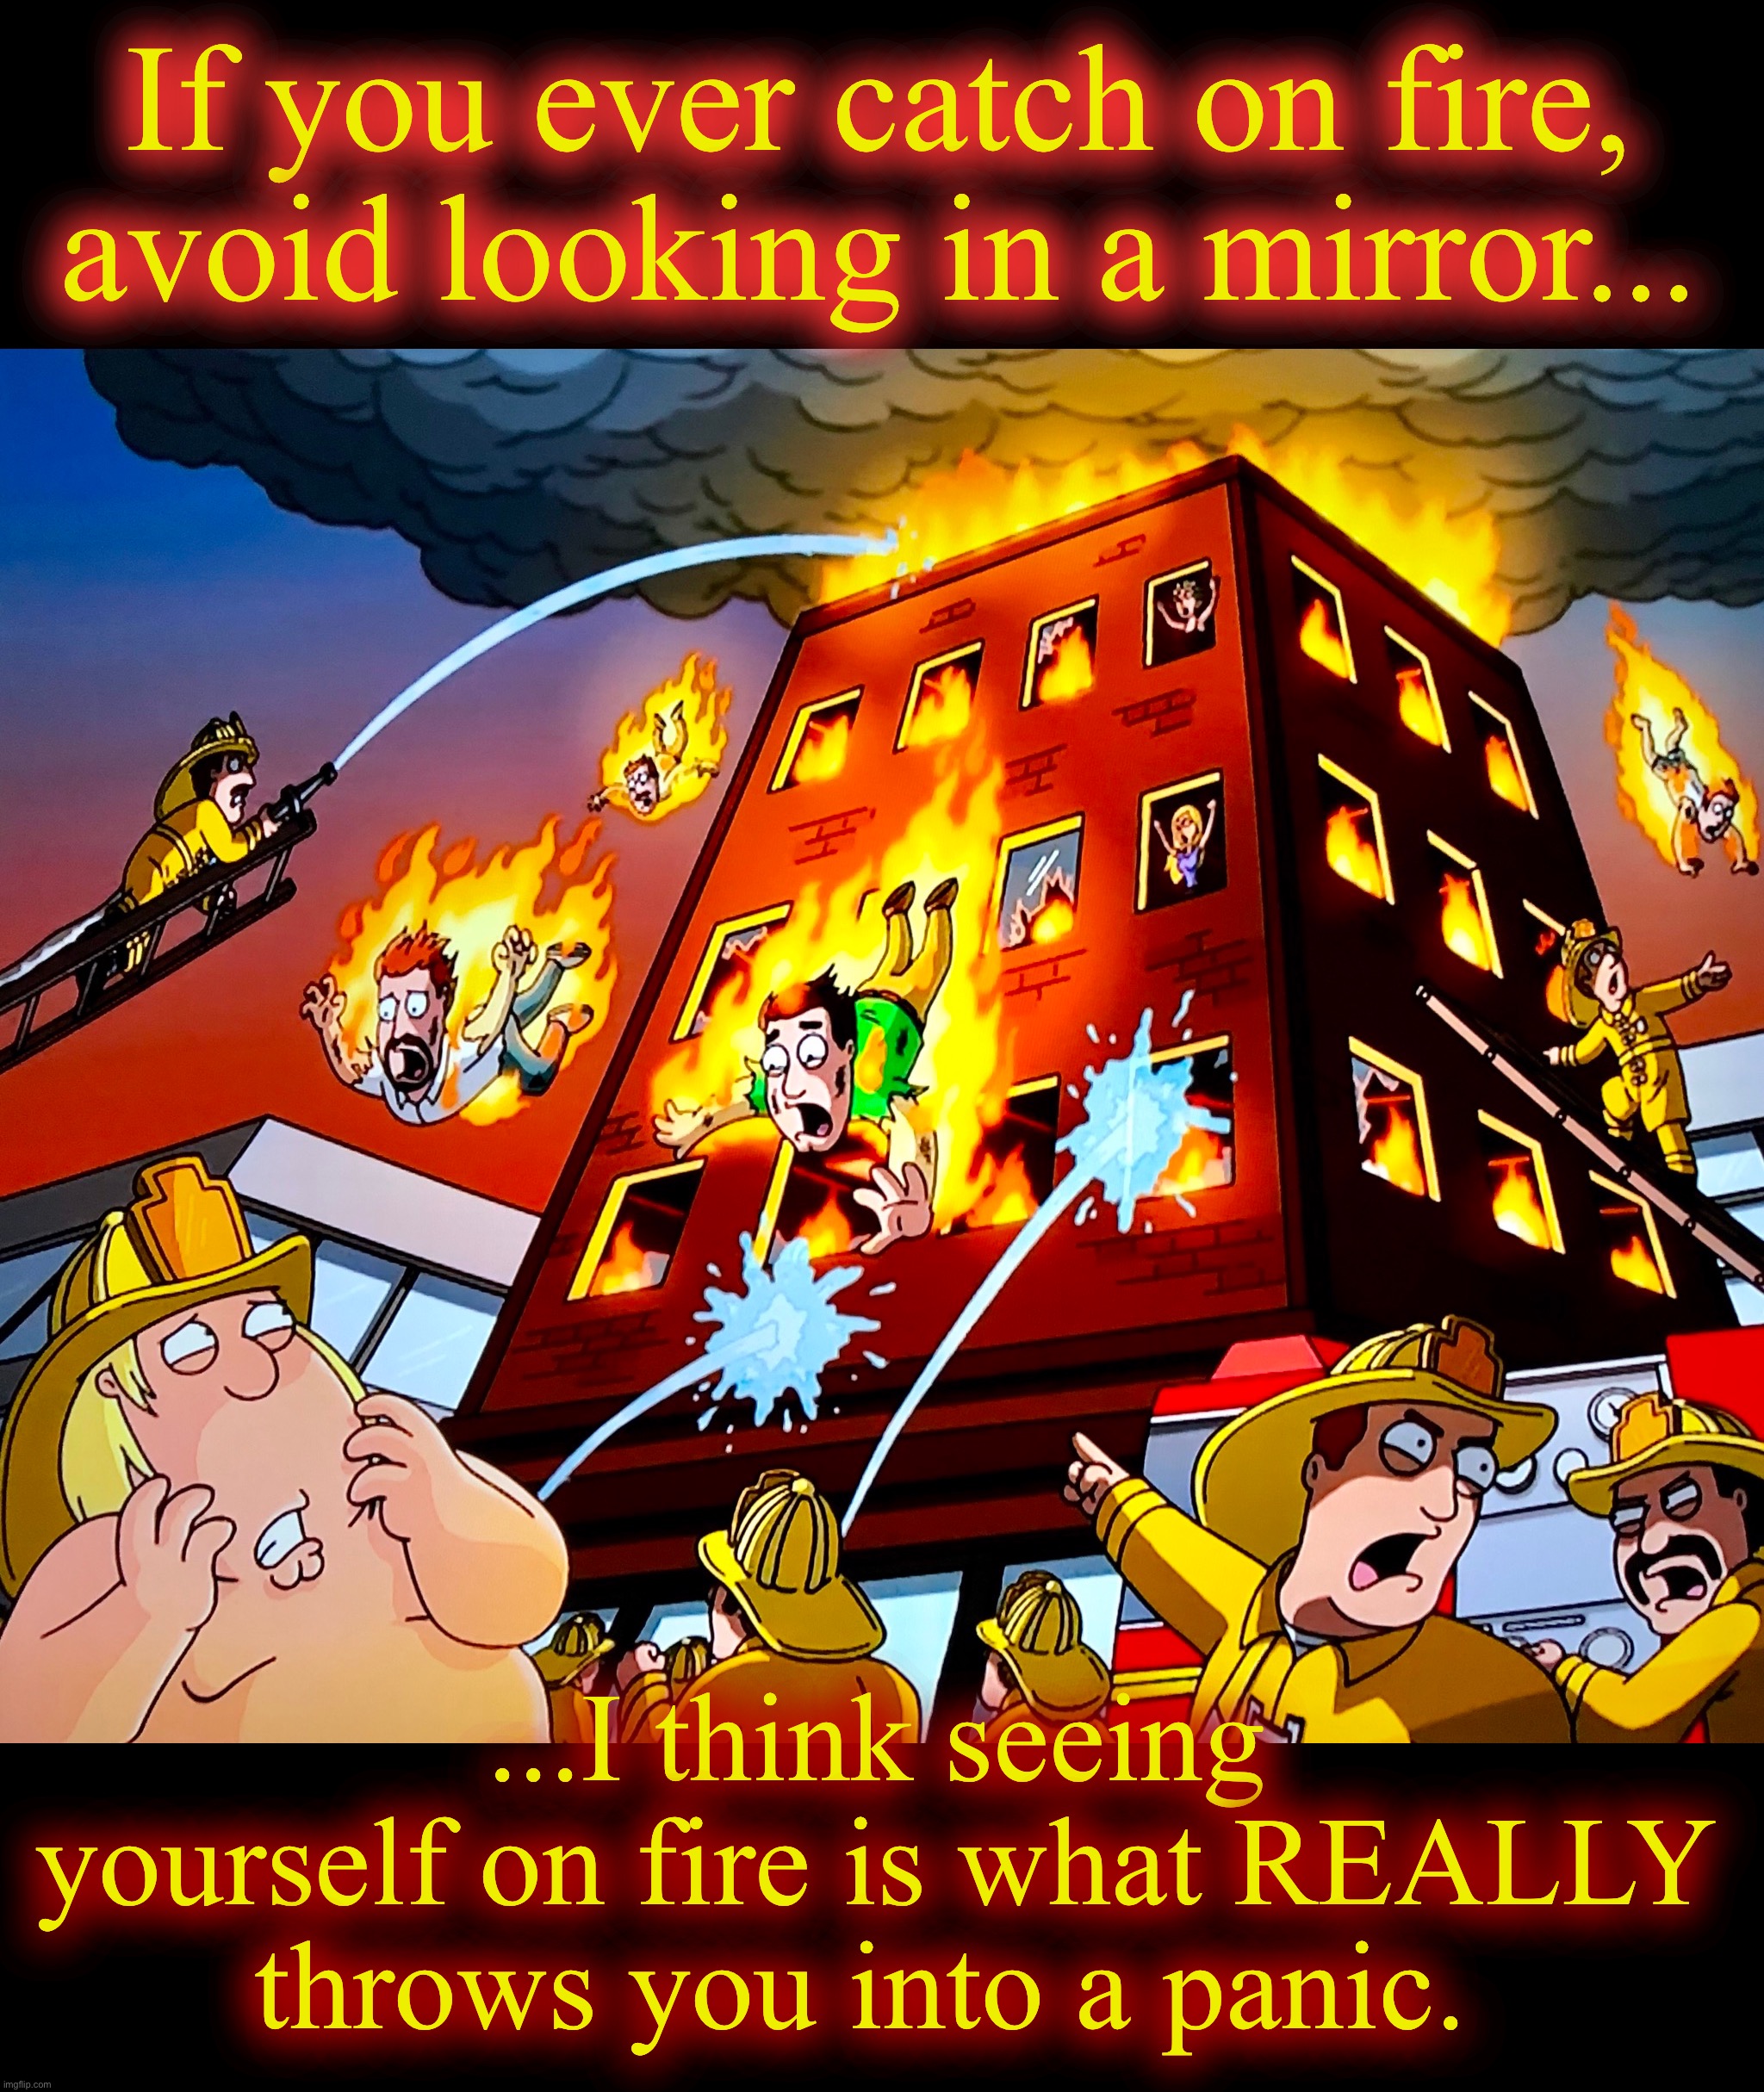 They didn’t listen | If you ever catch on fire, avoid looking in a mirror... ...I think seeing yourself on fire is what REALLY throws you into a panic. | image tagged in fire,memes,disaster,firefighter,burning man,panic | made w/ Imgflip meme maker